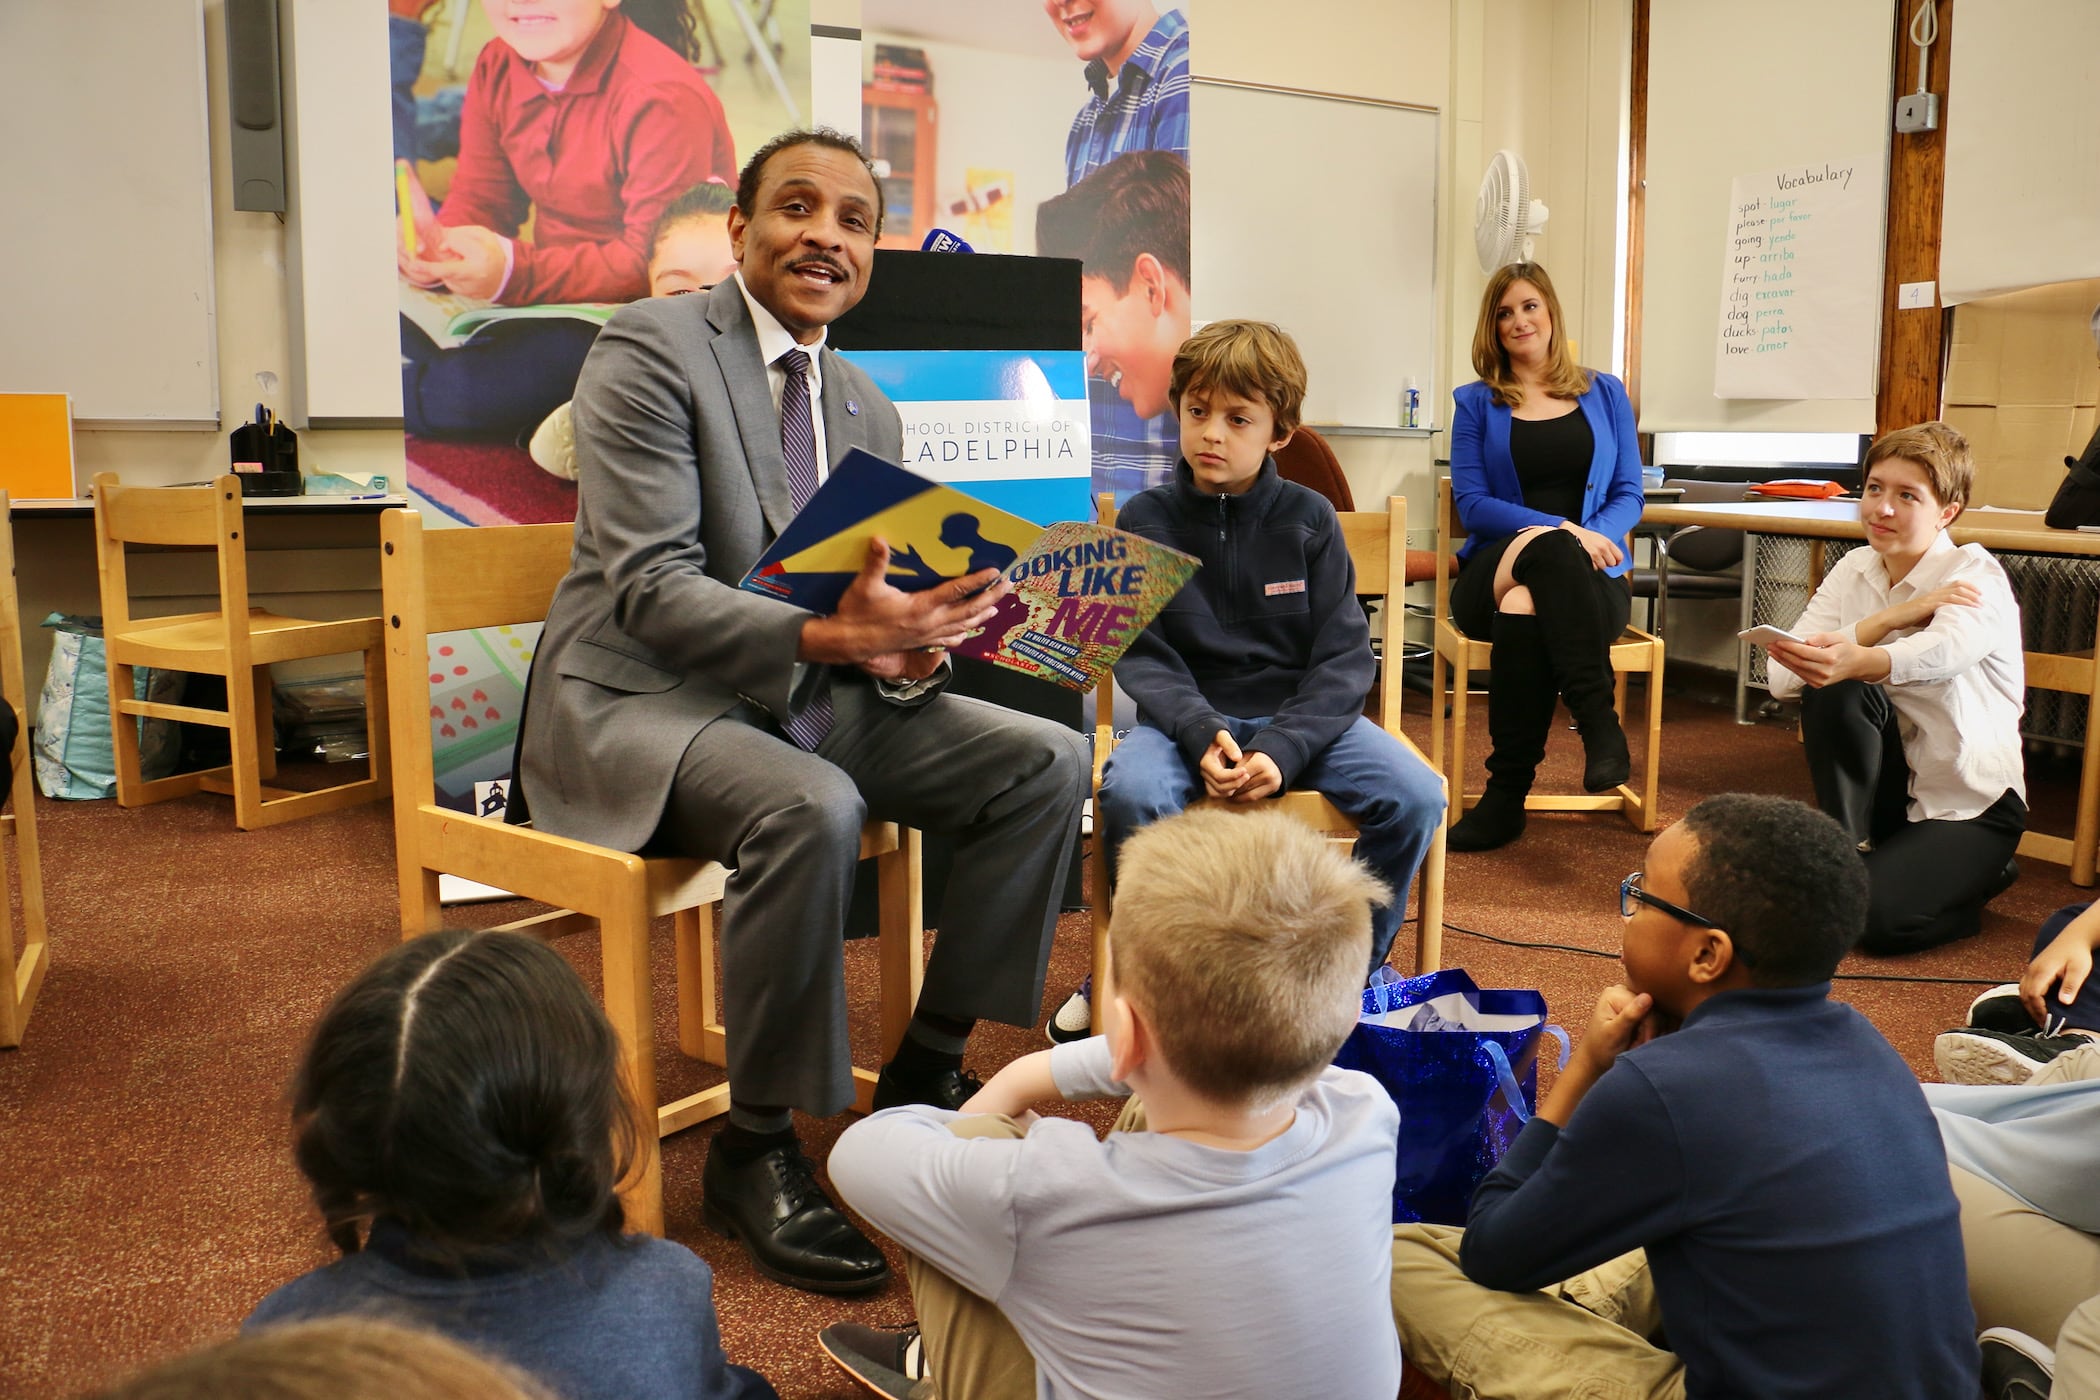 A man in a gray suit and dark tie sits on a chair reading a book aloud. A boy in a blue shirt and jeans sits next to him. Students sit on the floor listening. A teacher wearing a black dress, black boots, and a bright blue jacket sits to the left of him.